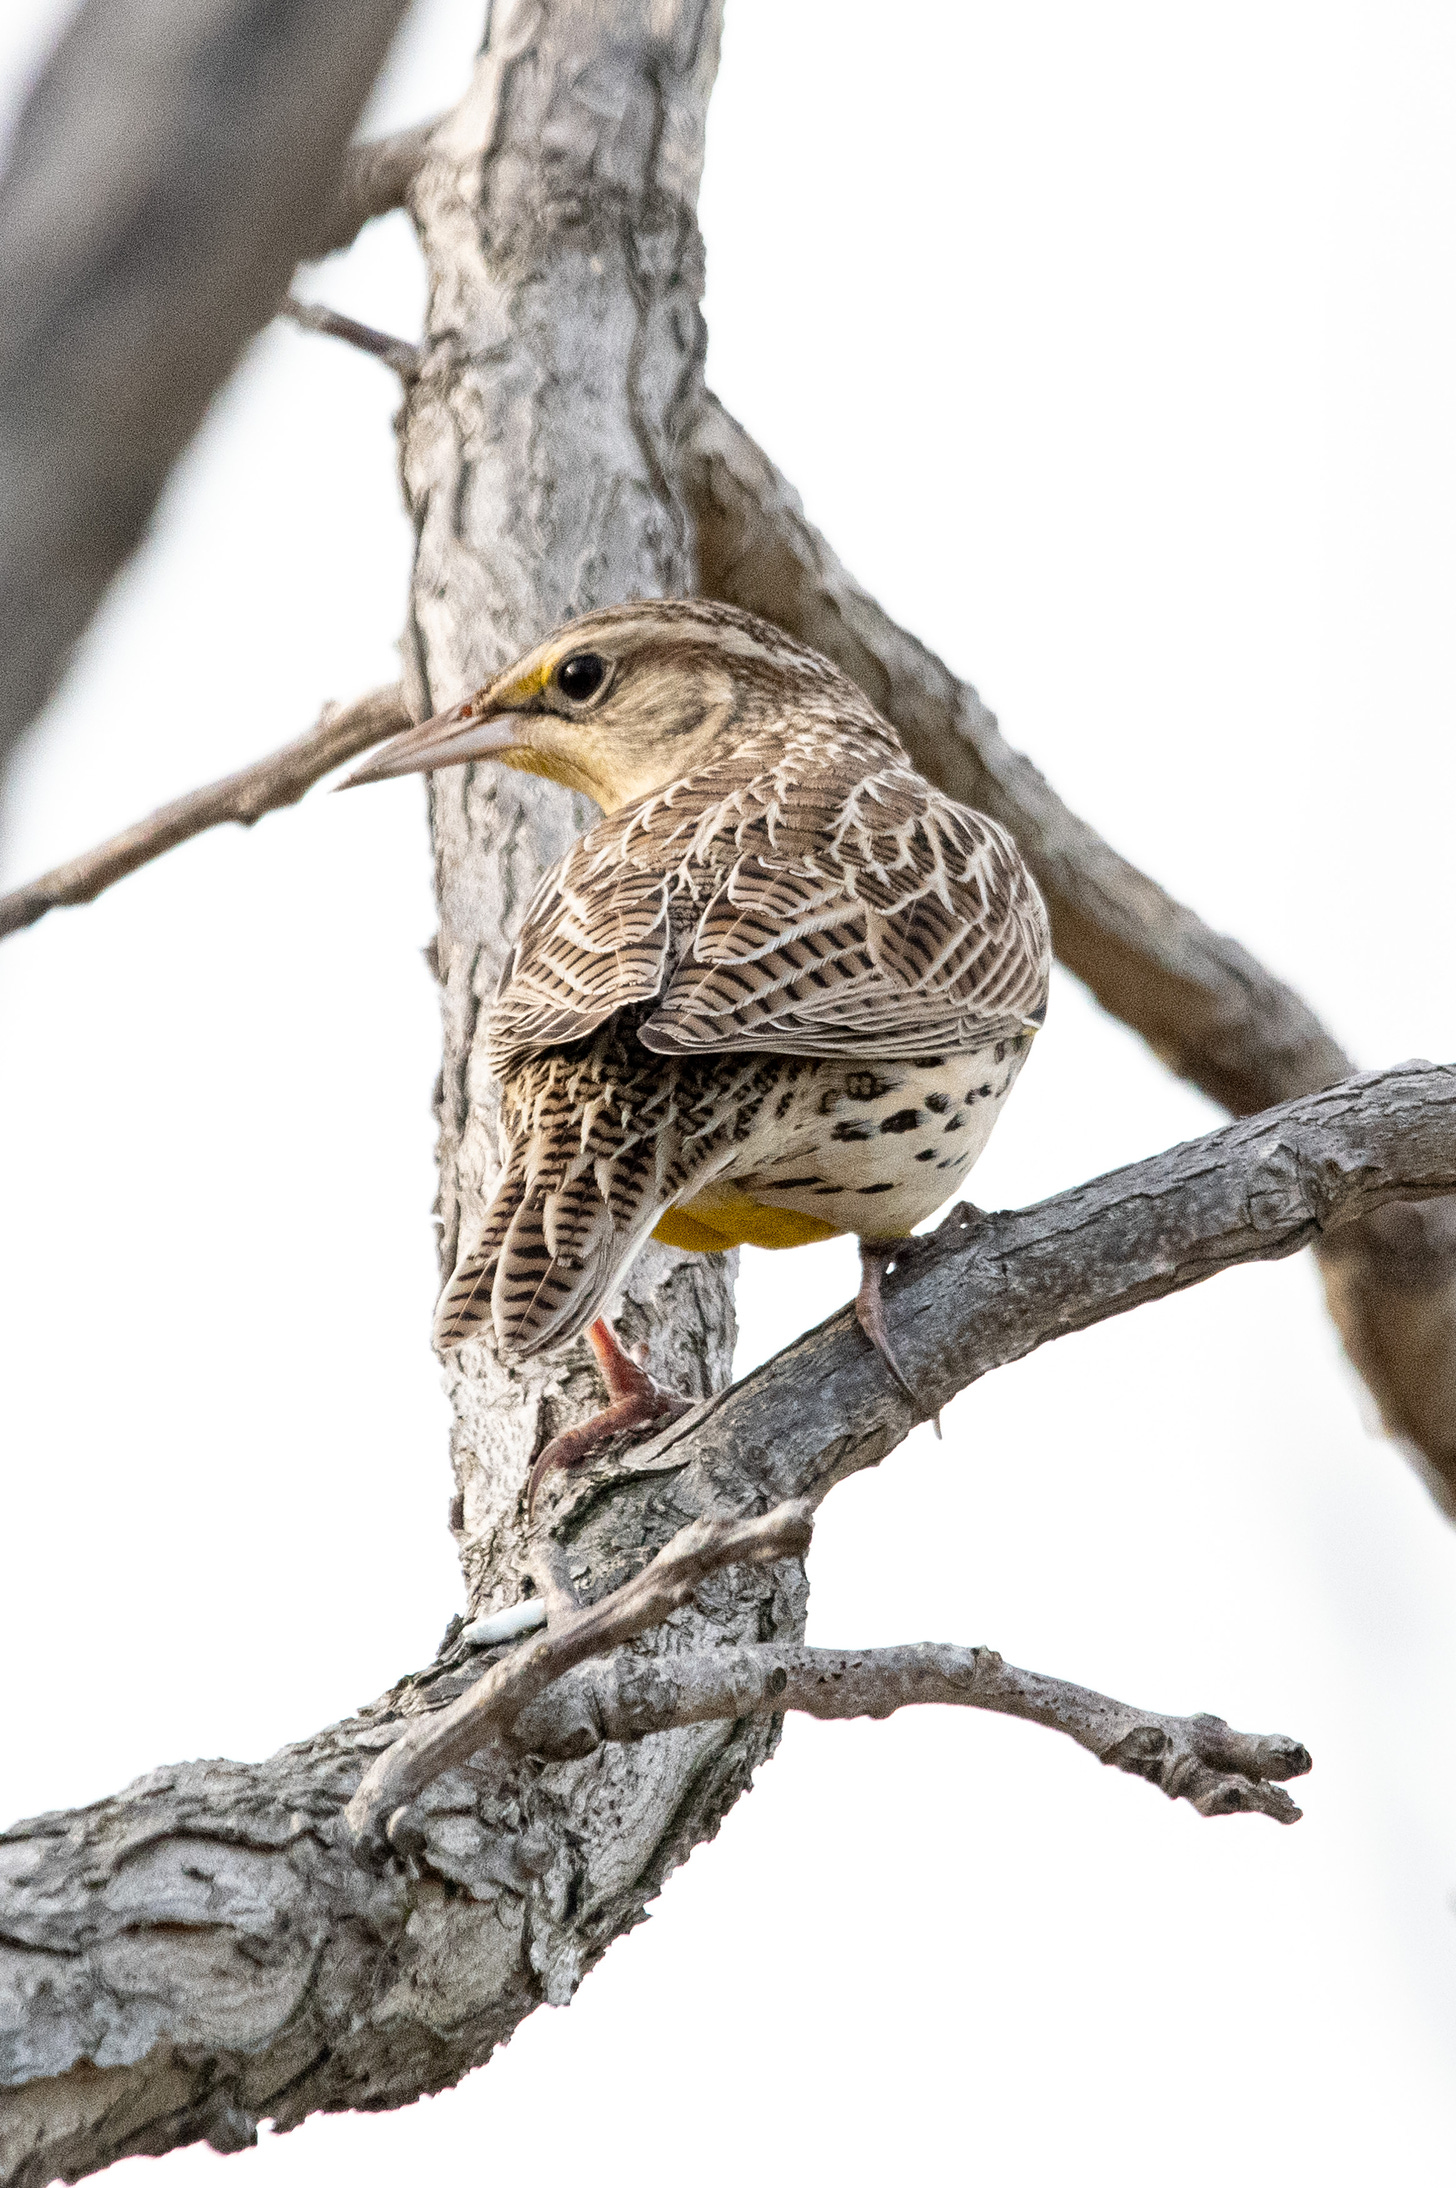 A close-up of a Western meadowlark, seen from behind so that the distinctive ladder-like pattern on its tailfeathers is visible